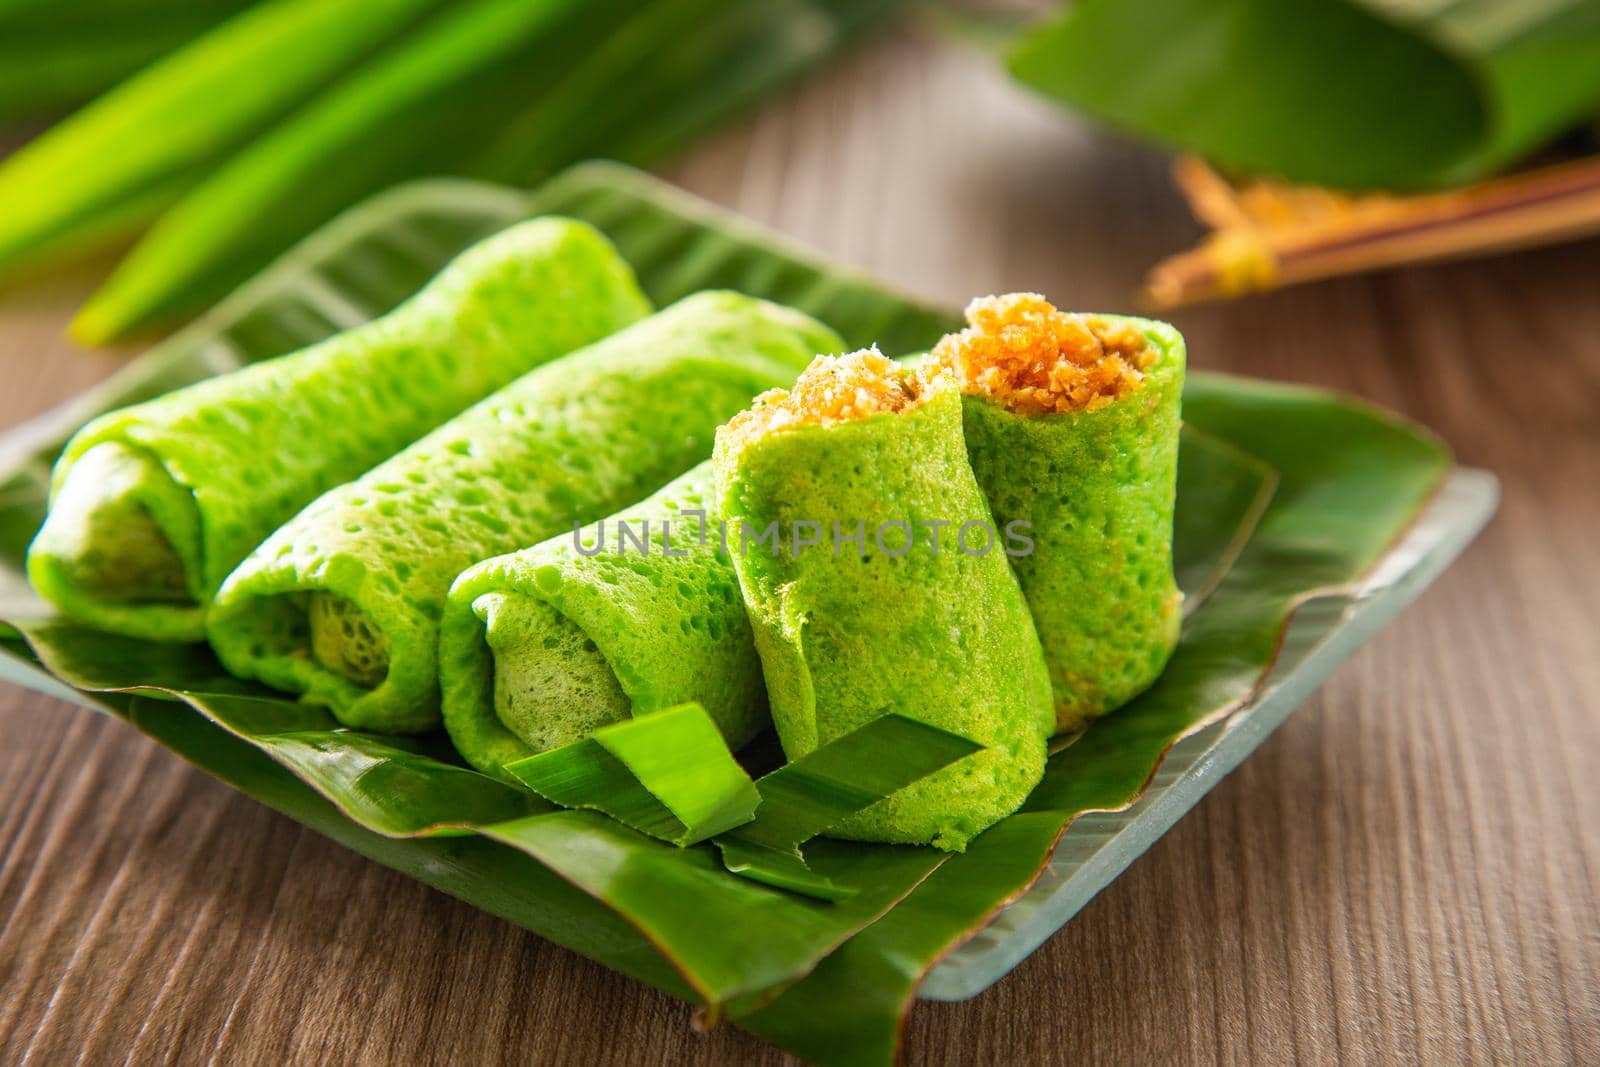 Malaysia popular sweet dessert with coconut known as kuih ketayap by tehcheesiong